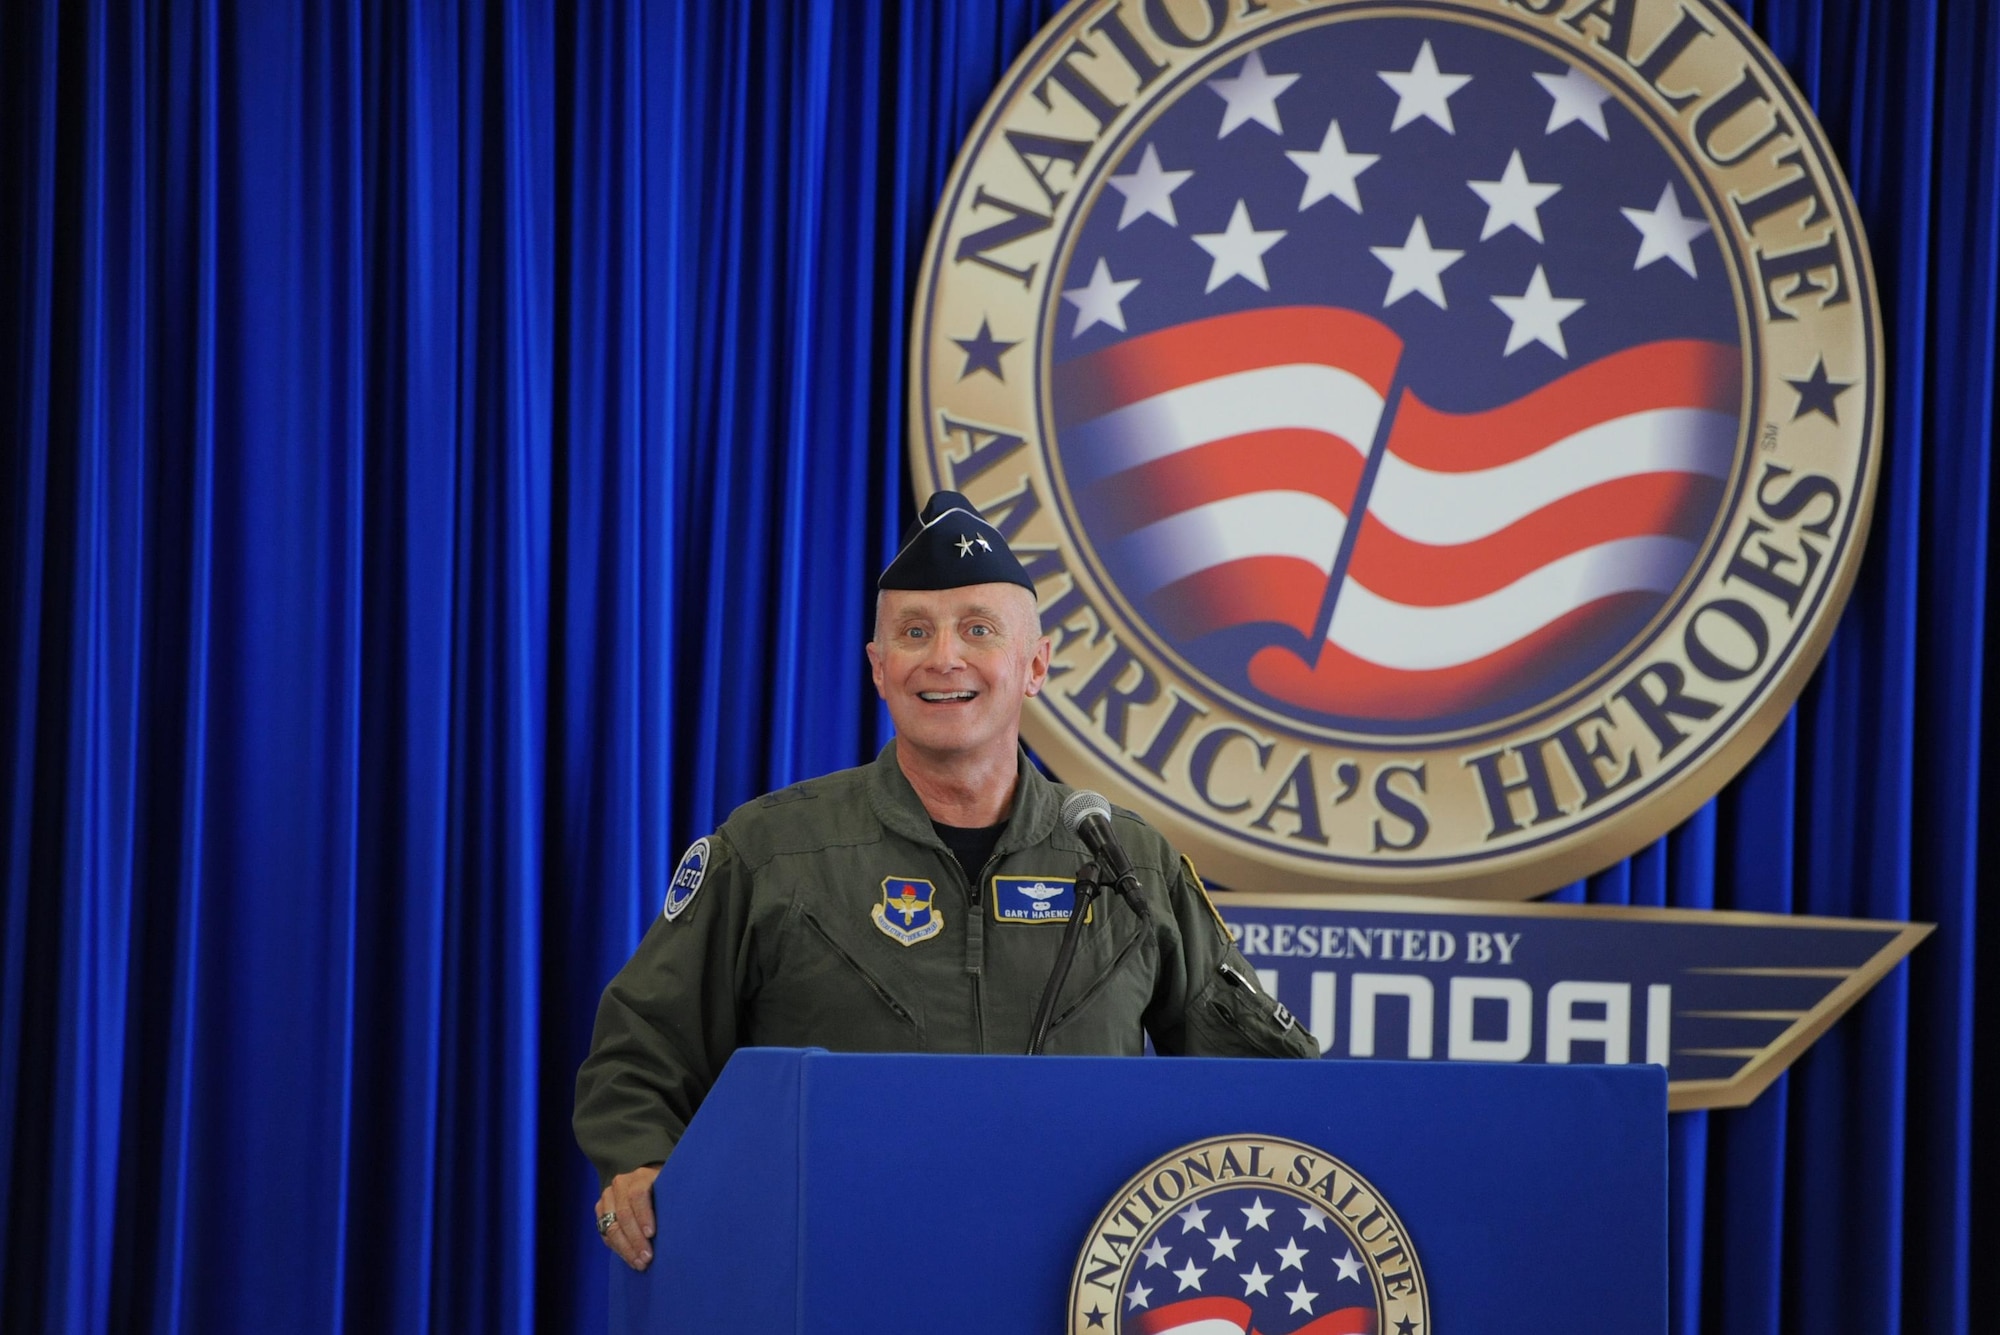 Air Force Maj. Gen. Garrett Harencak, Air Force Recruiting Service commander, speaks during the Memorial Day weekend National Salute to America’s Heroes Miami Air and Sea Show at U.S. Coast Guard Air Station Miami in Opa-Locka, Fla., May 26, 2017. Air Force, Army, Navy, Marine Corps, and Coast Guard Delayed Entry Program recruits took the Oath of Enlistment during a swear-in ceremony in which Harencak provided words of encouragement and gratitude. (U.S. Air Force photo by Senior Airman Erin Trower)